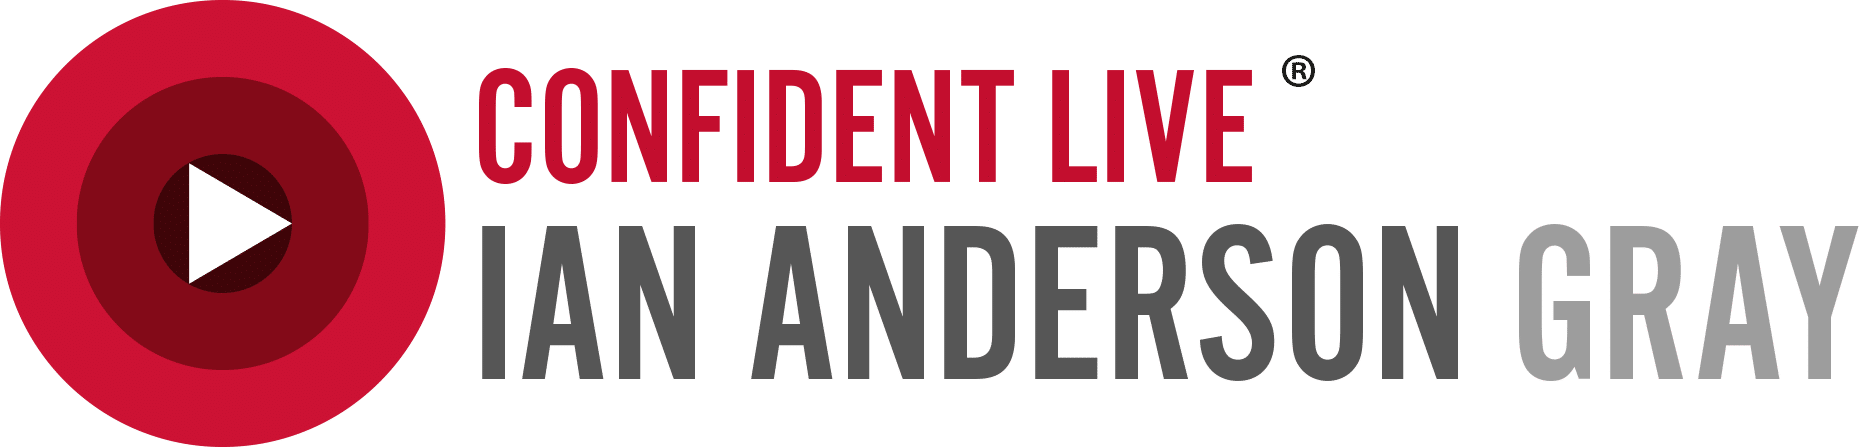 Confident Live with Ian Anderson Gray